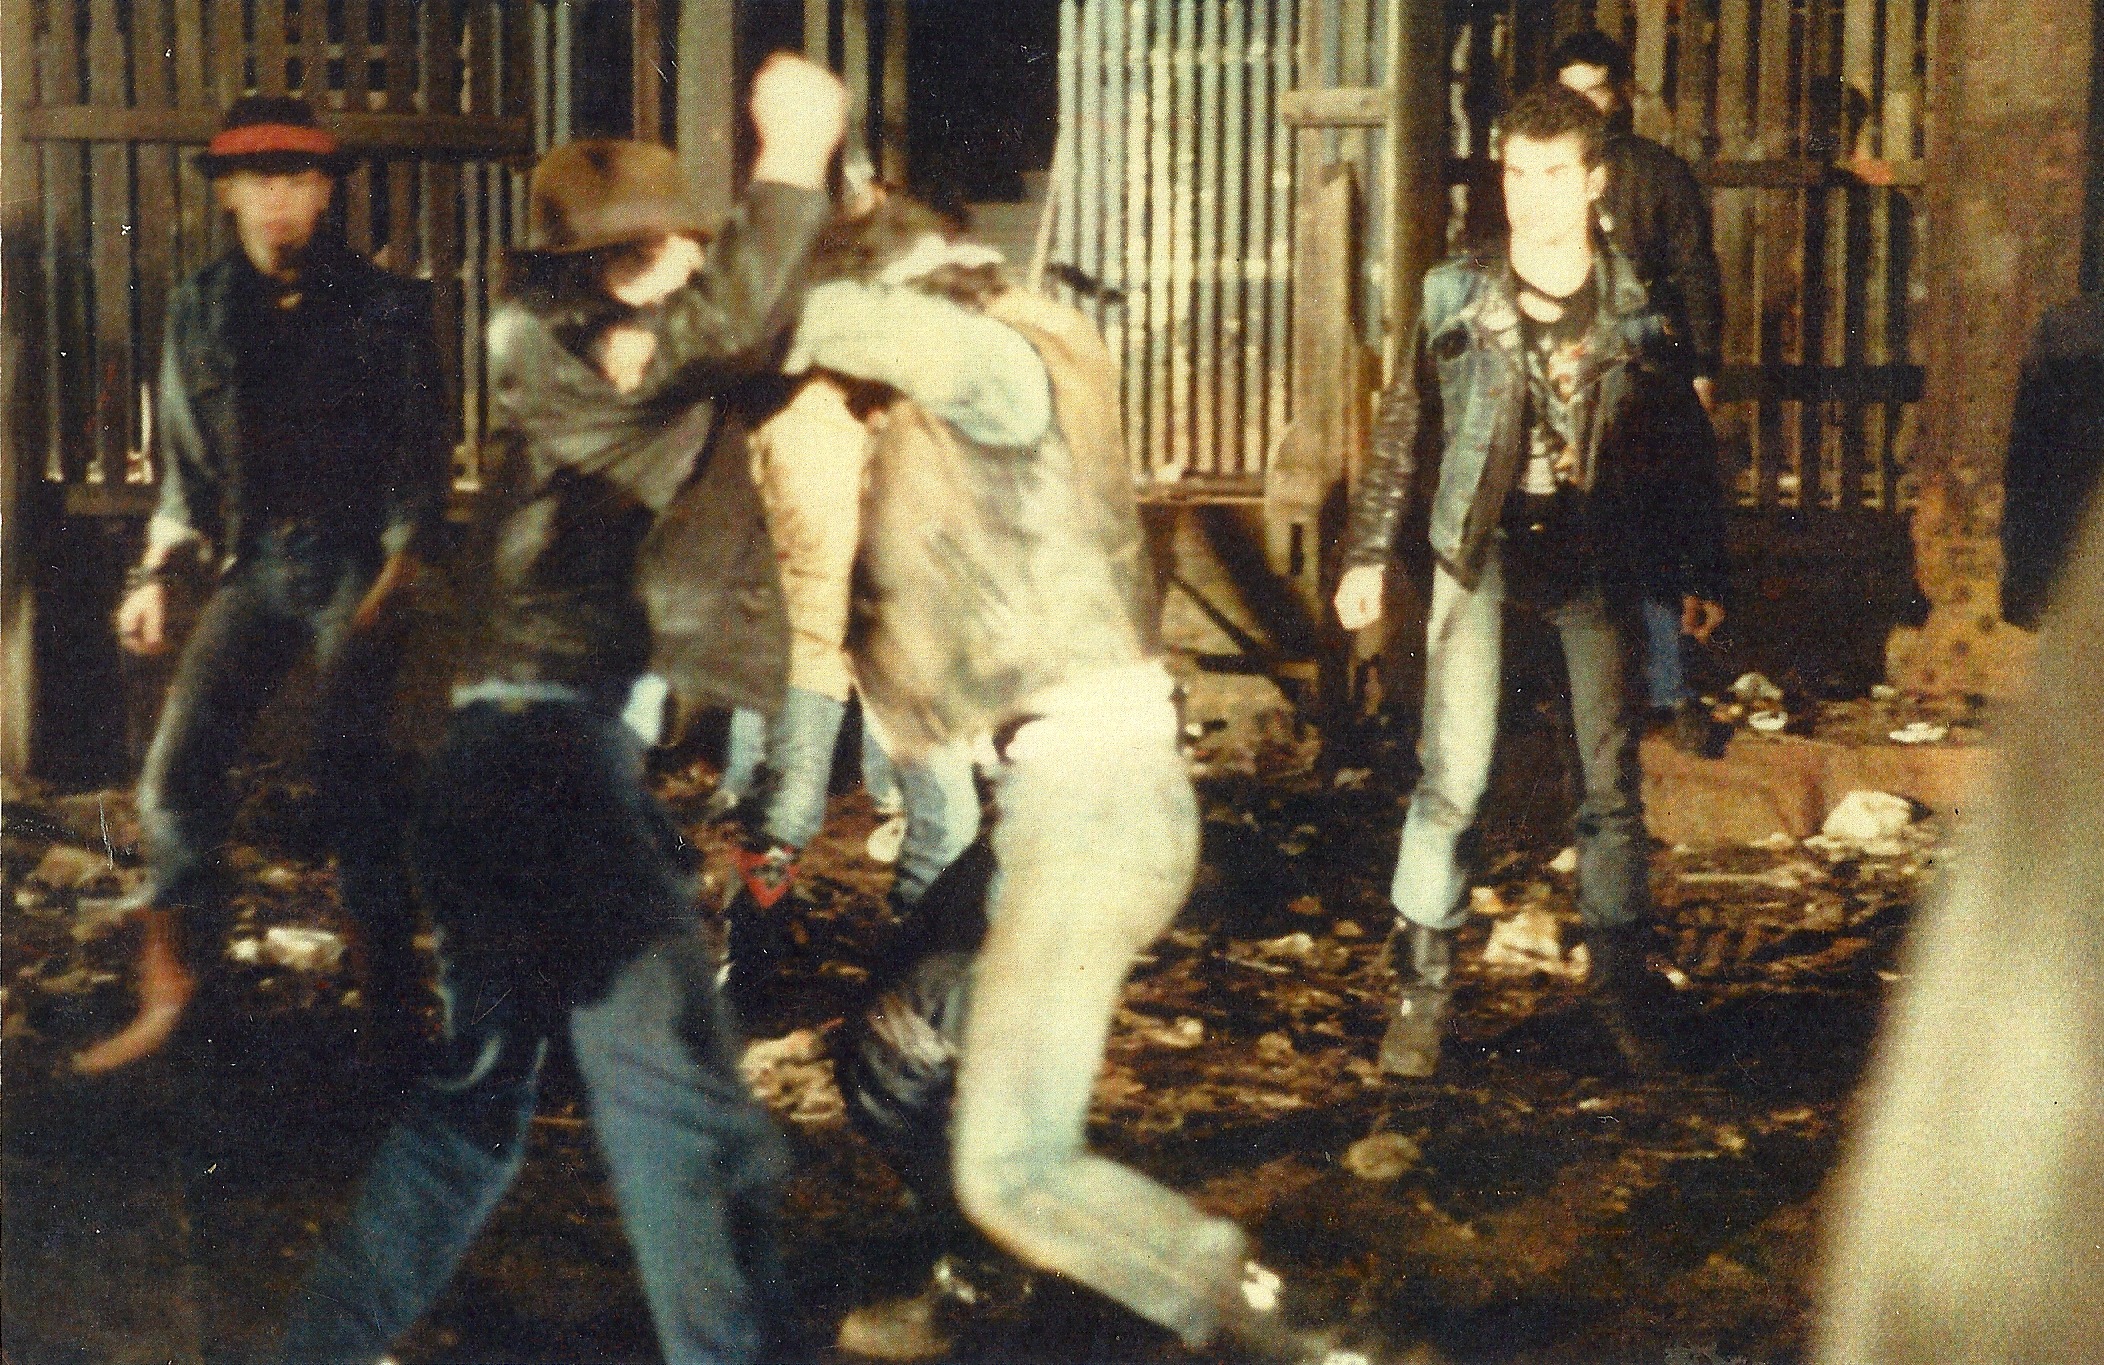 Richard D'Alessandro on the right in a knife fight in the film 